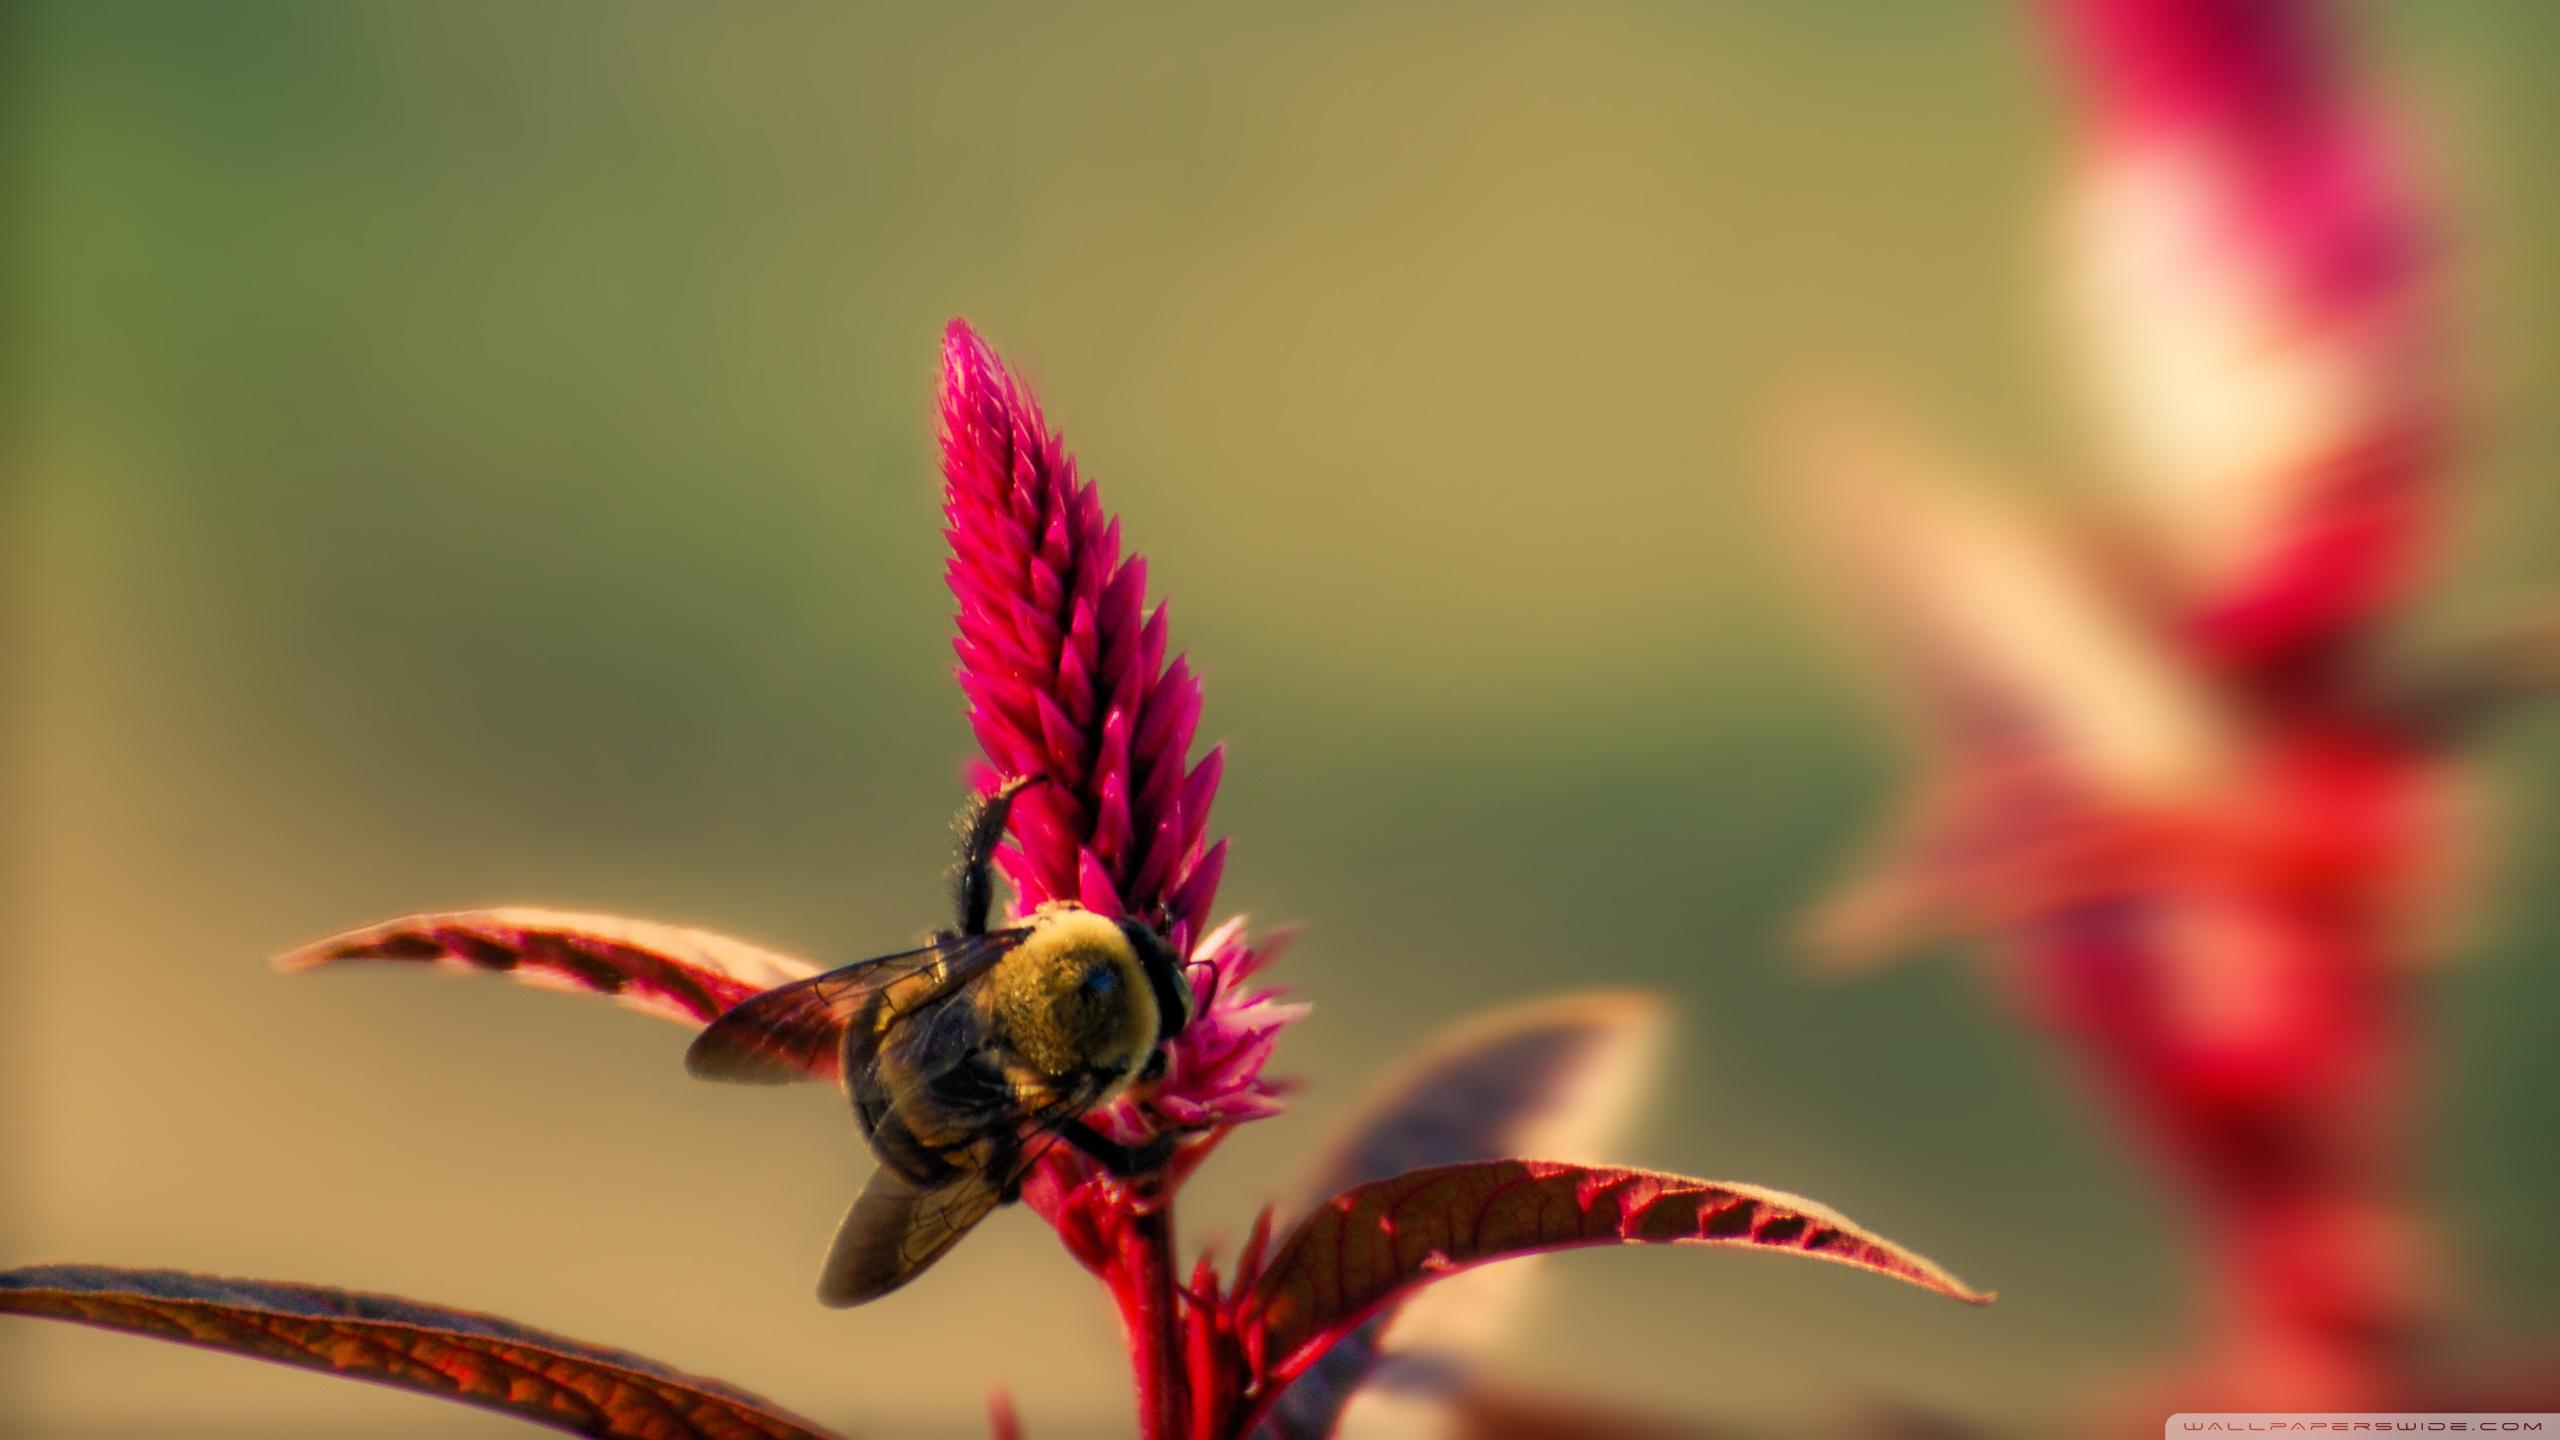 Bumble Bee Insect Ultra HD Desktop Background Wallpaper